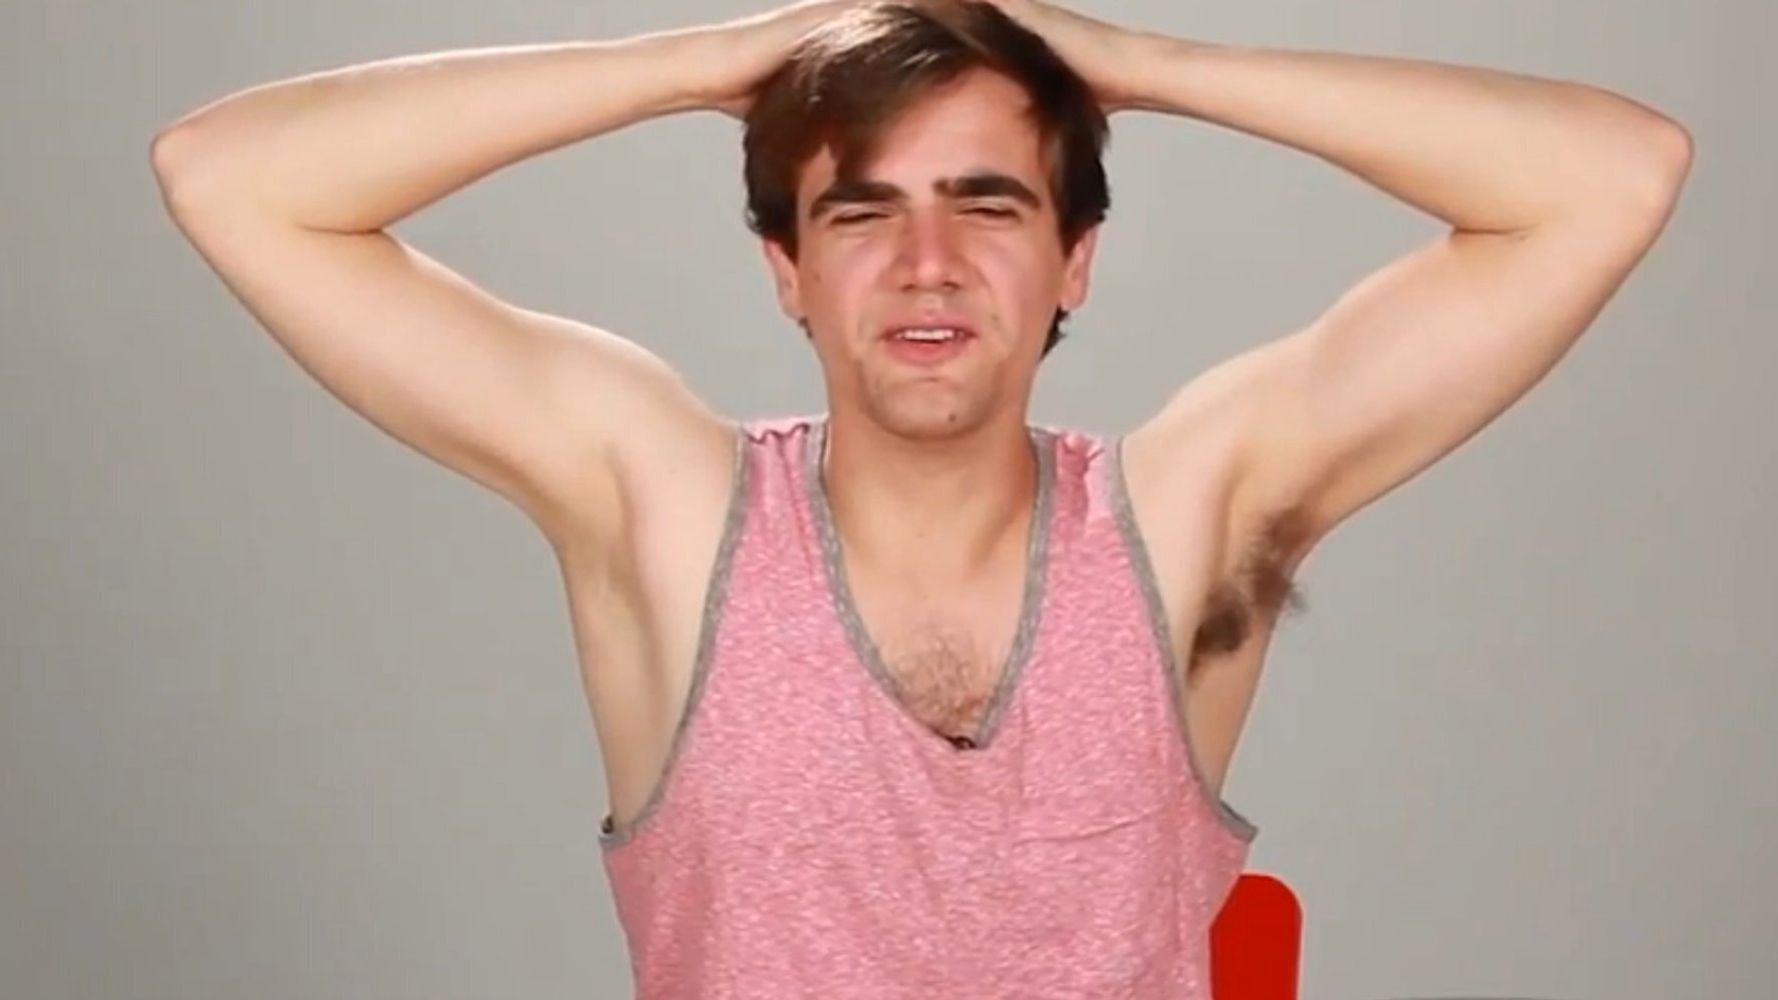 Men Shave Their Armpit Hair For The First Time And Gain Newfound Respect For Their Female